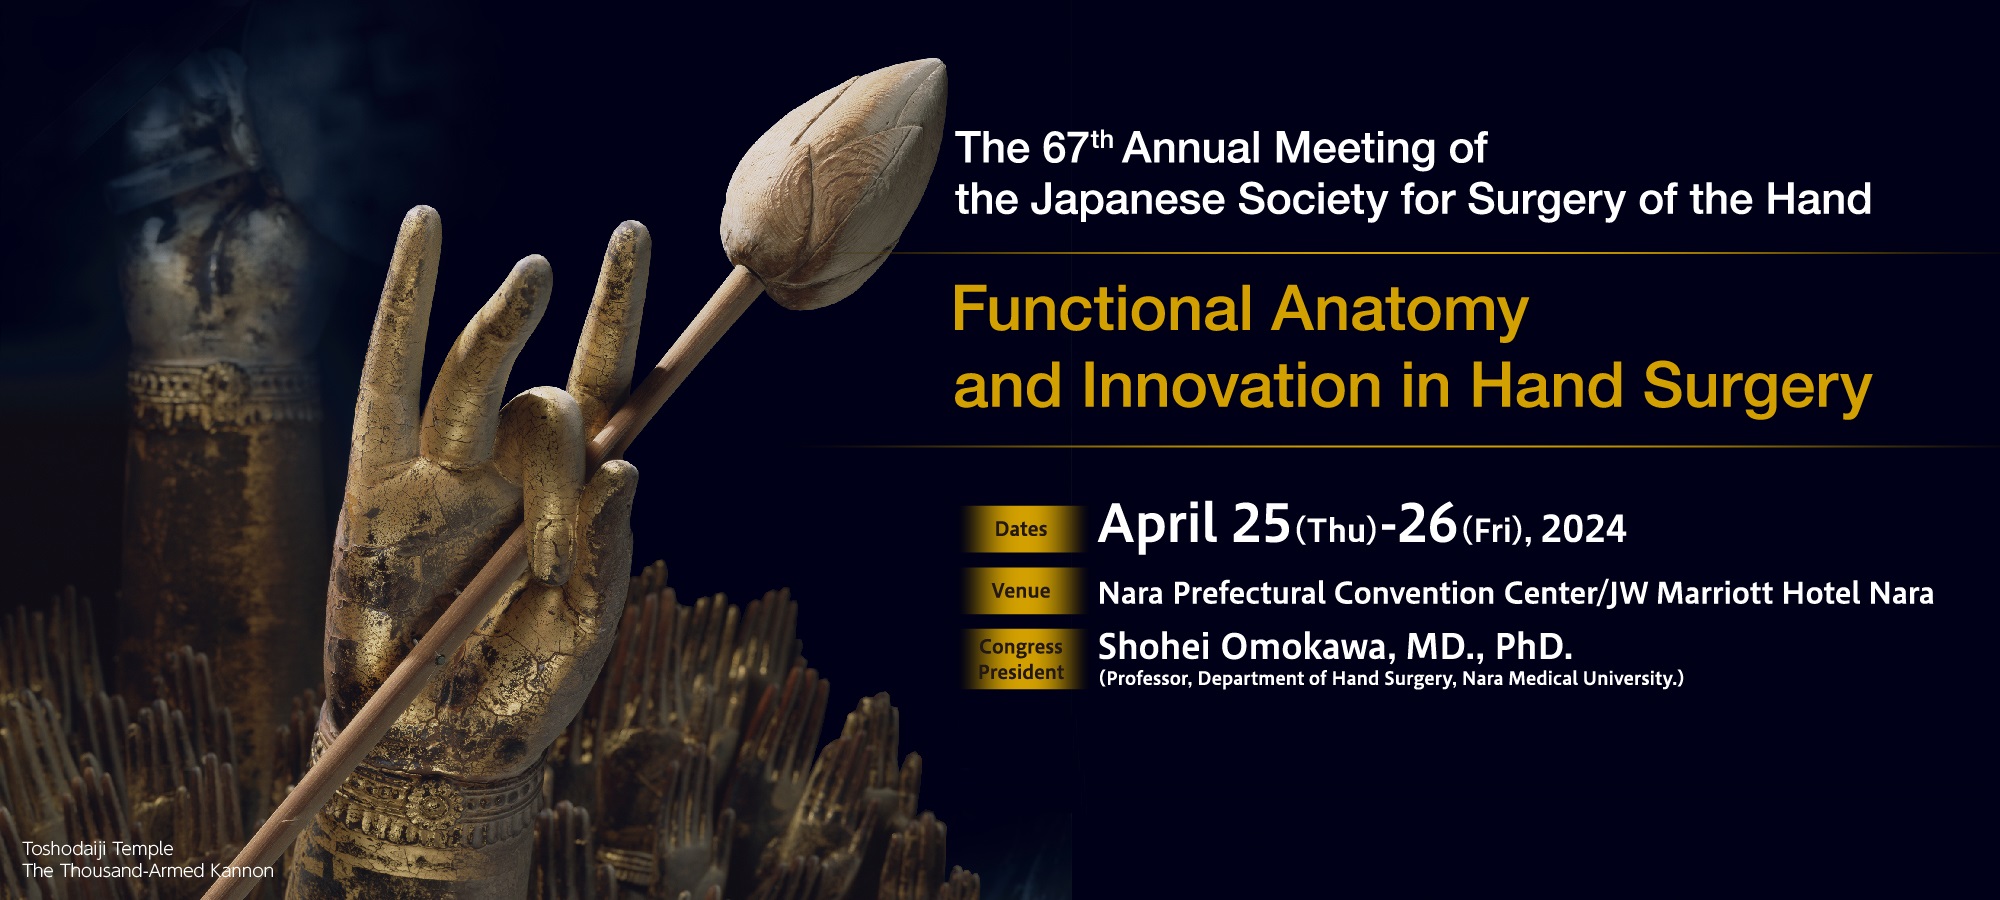 The 67th Annual Meeting of the Japanese Society for Surgery of the Hand